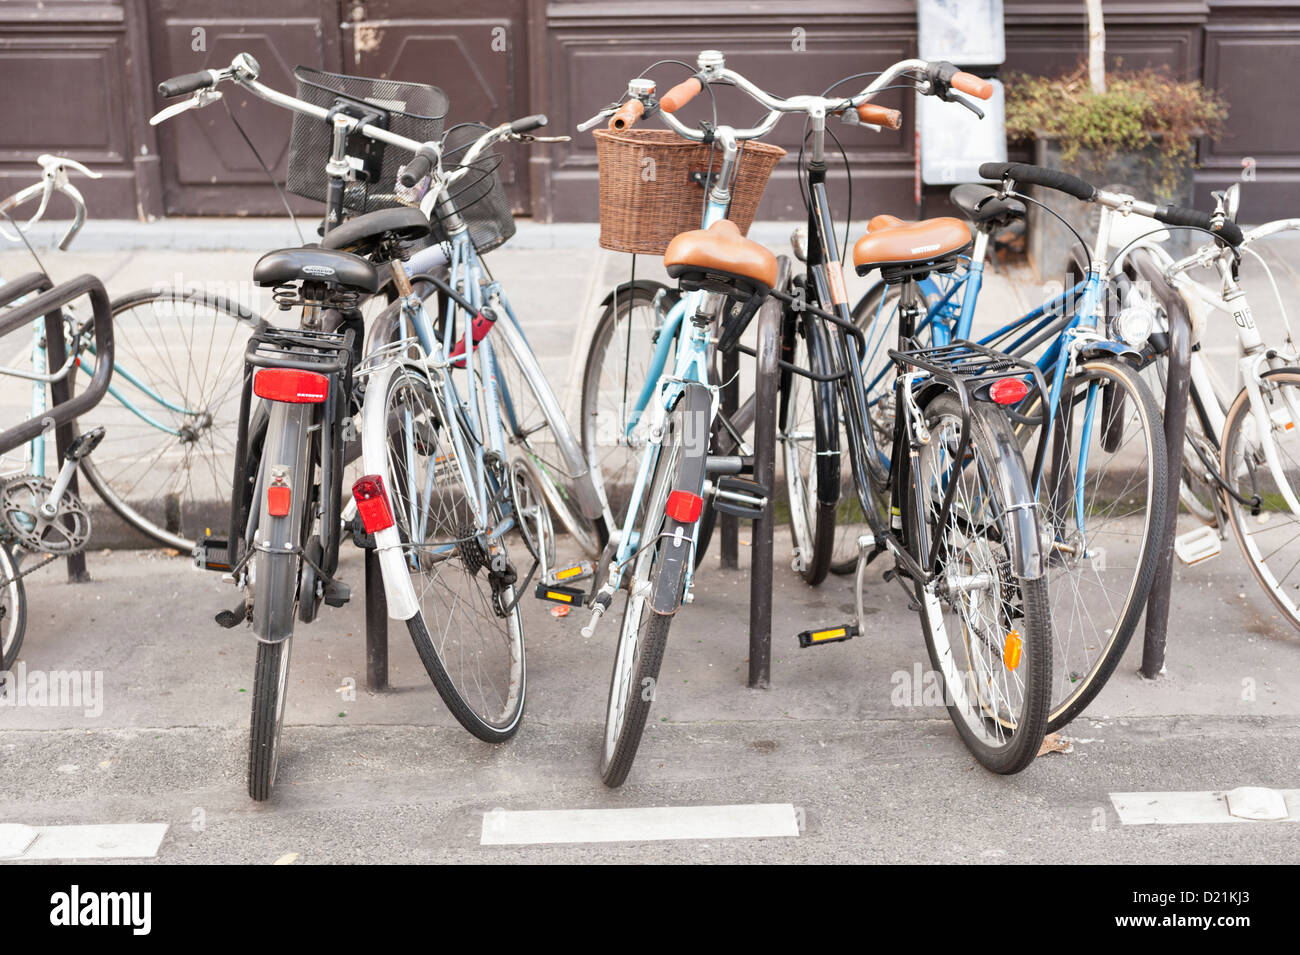 Paris, France: Old bicycles parked haphazardly on the street Stock Photo